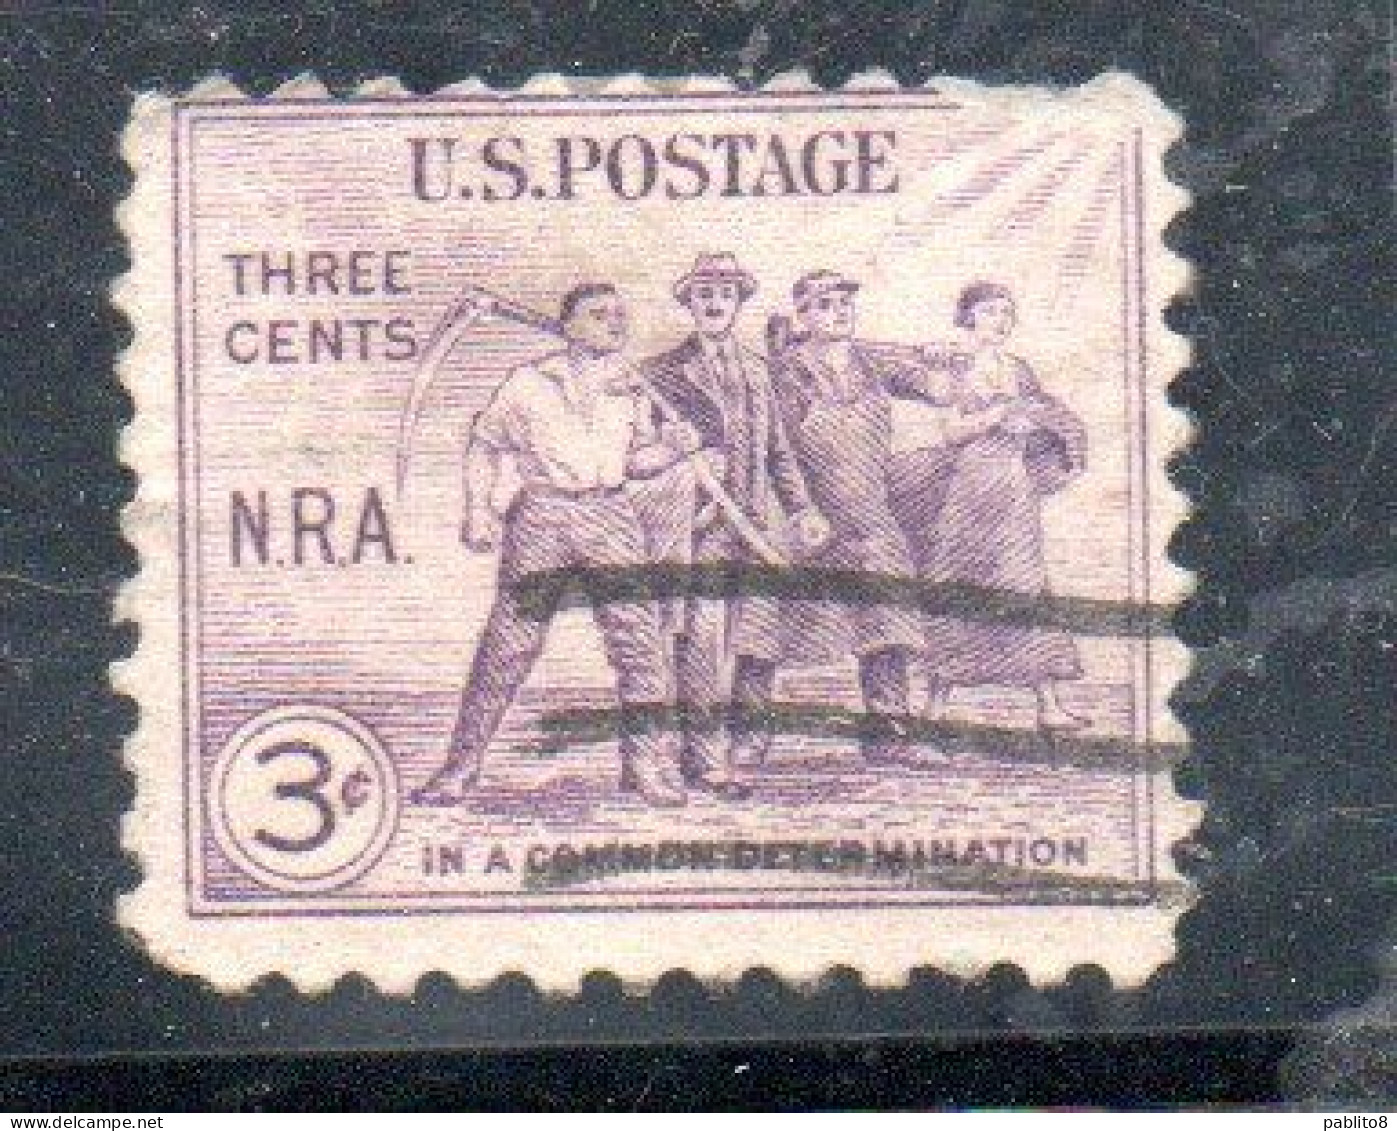 USA STATI UNITI 1933 NATIONAL RECOVERY ACT ISSUE NRA GROUP OF WORKERS CENT 3c STRIP USED USATO OBLITERE' - Gebraucht